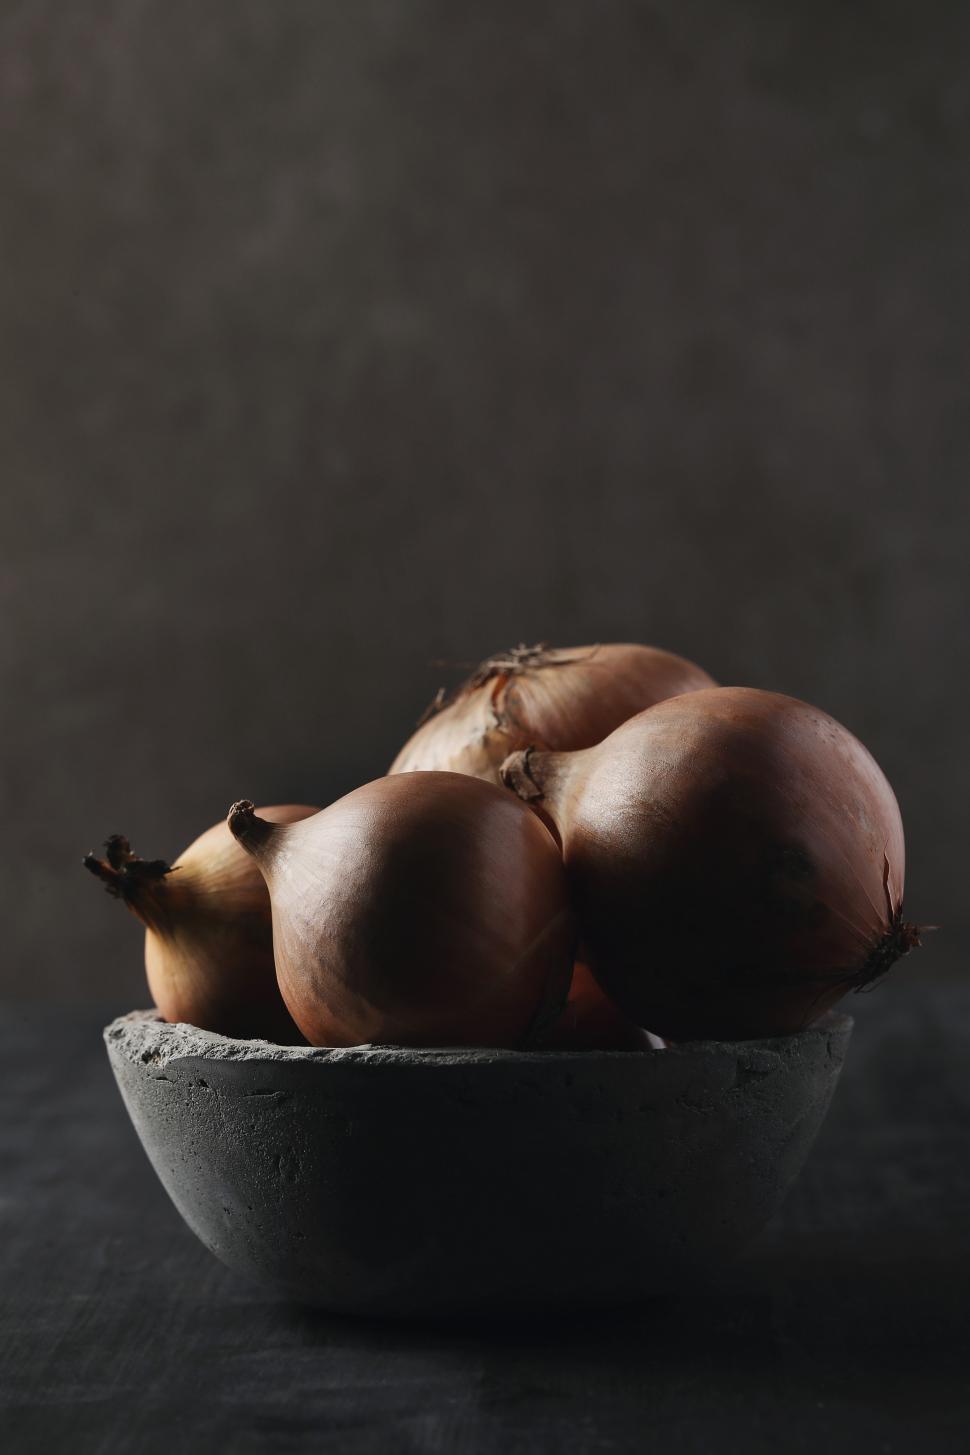 Free Image of Onions in a bowl 